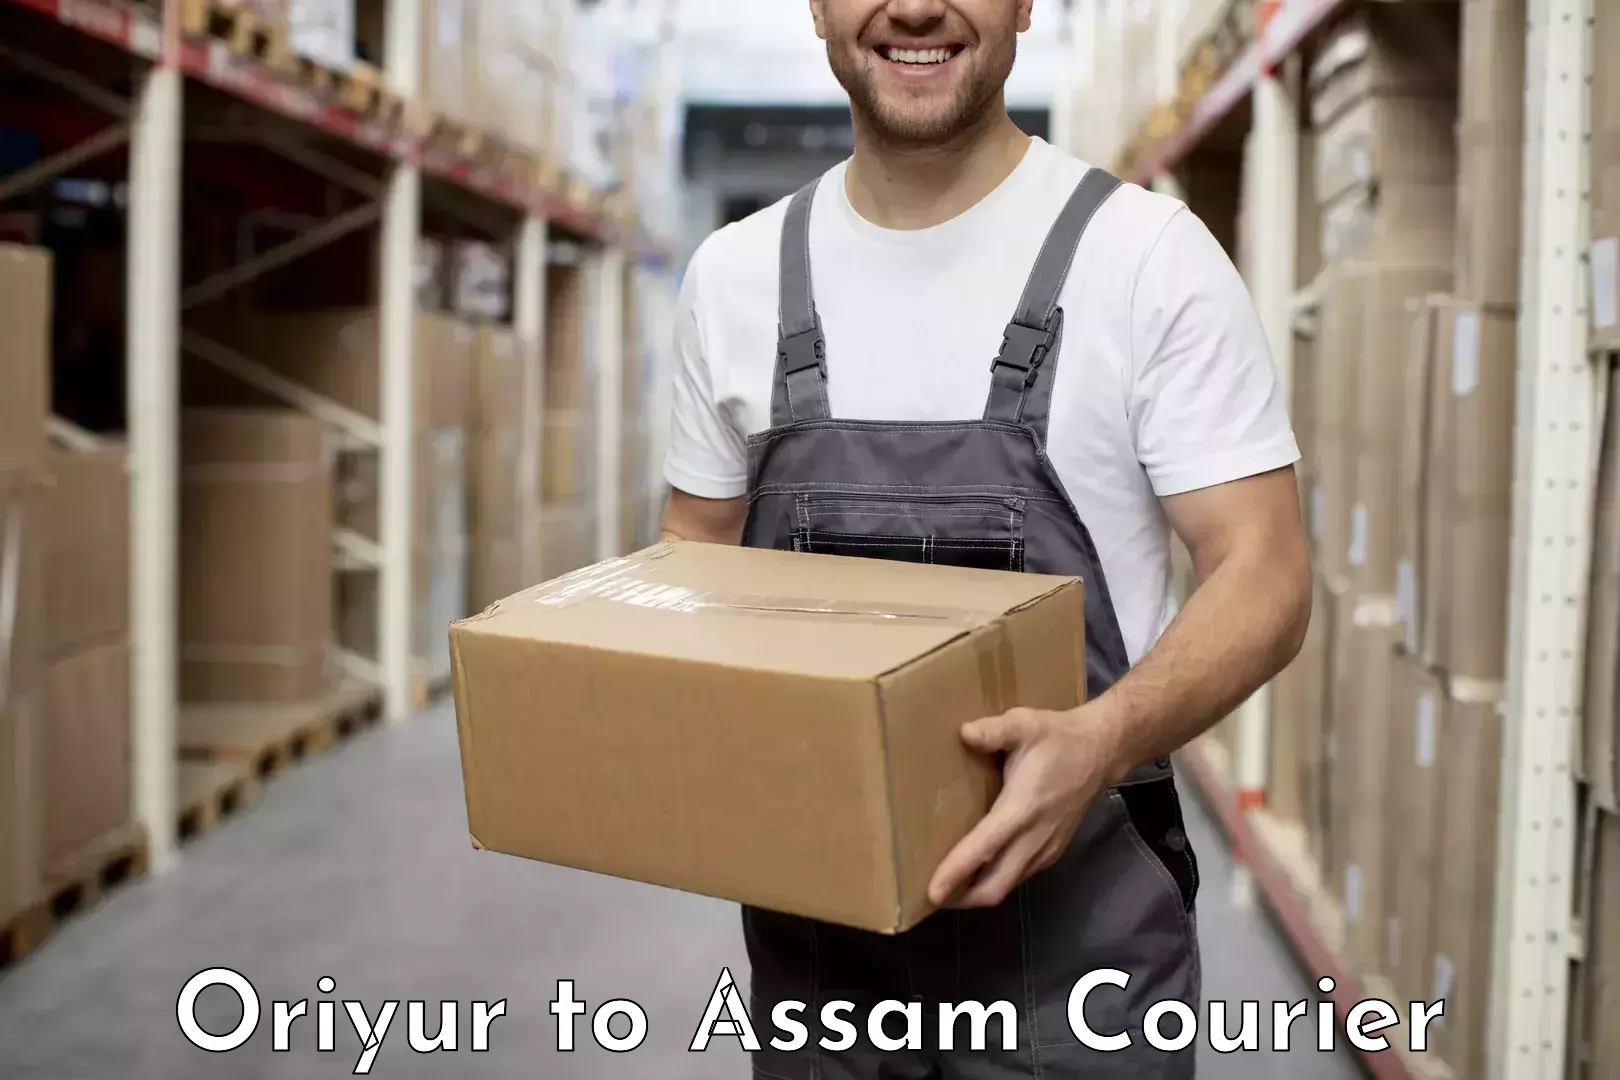 24/7 courier service Oriyur to Mariani